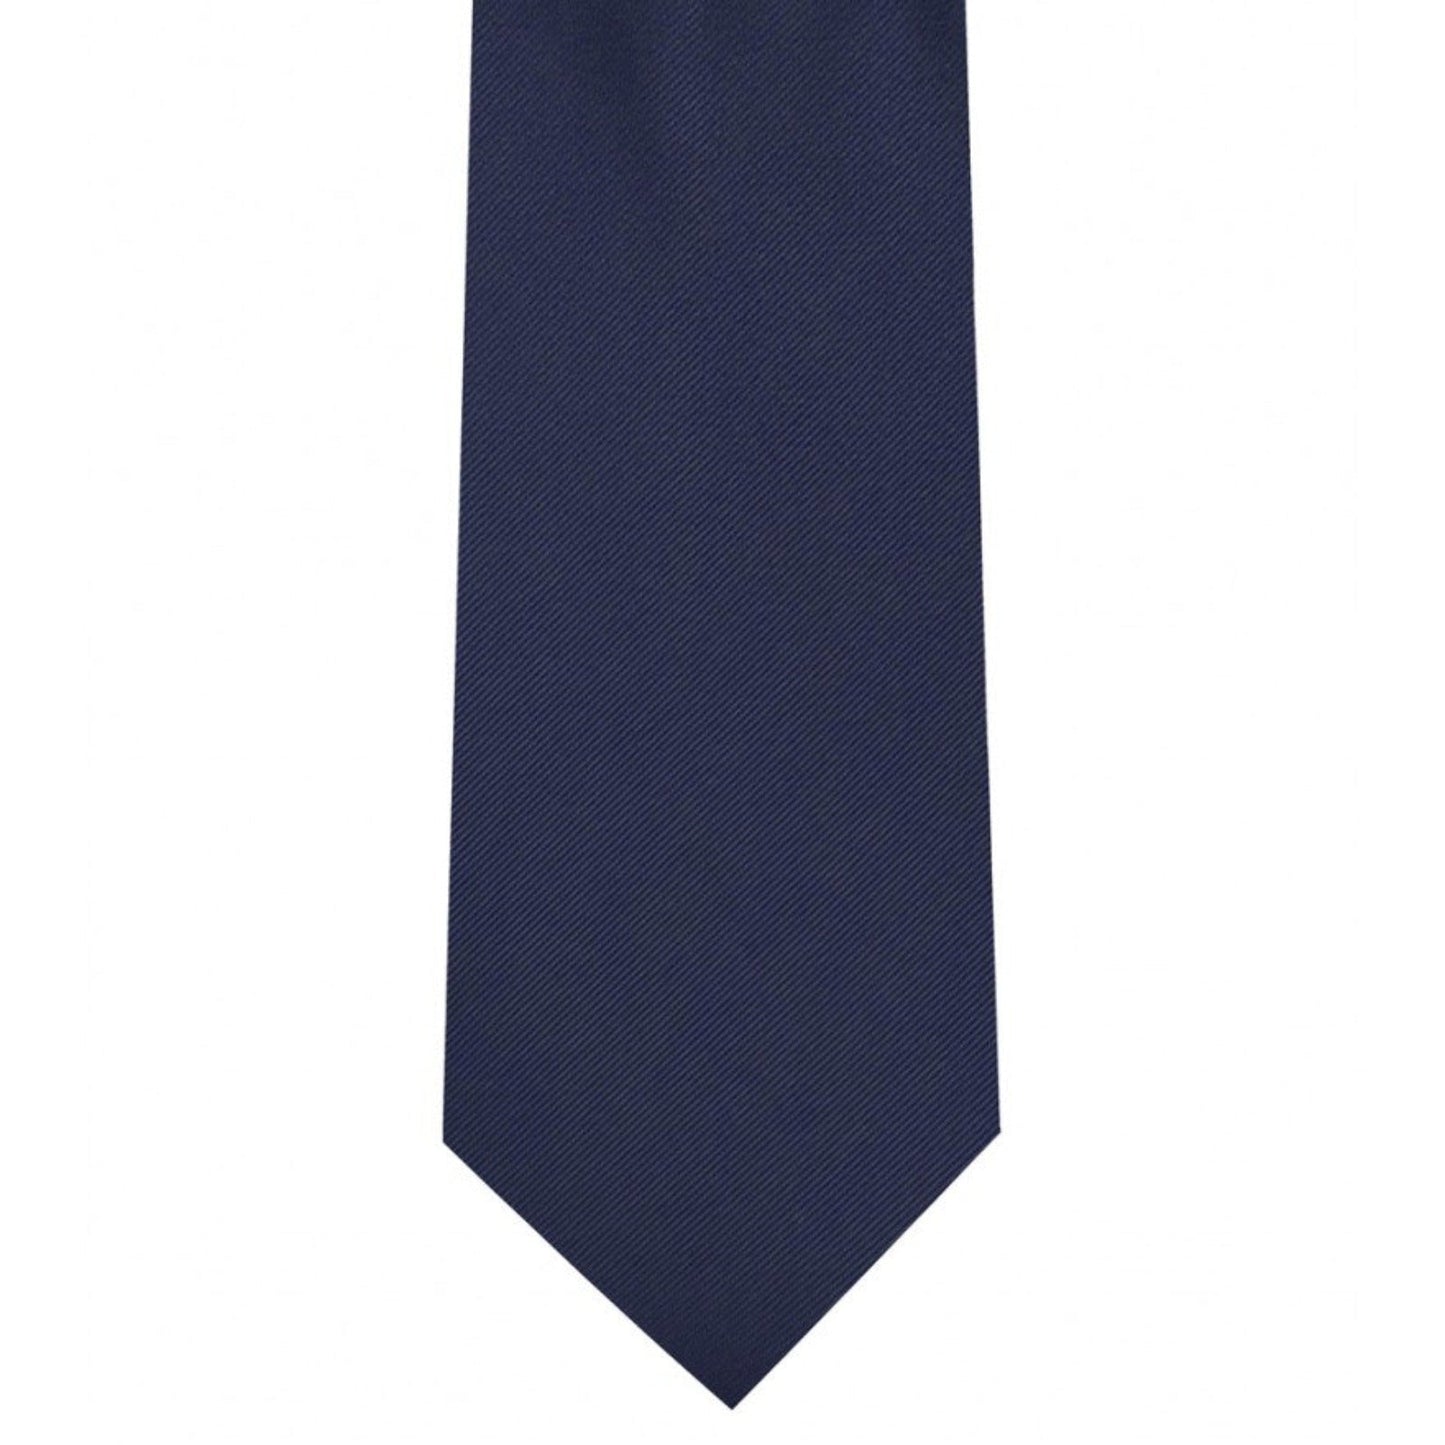 Classic Navy Blue Tie Ultra Skinny tie width 2.25 inches With Matching Pocket Square | KCT Menswear